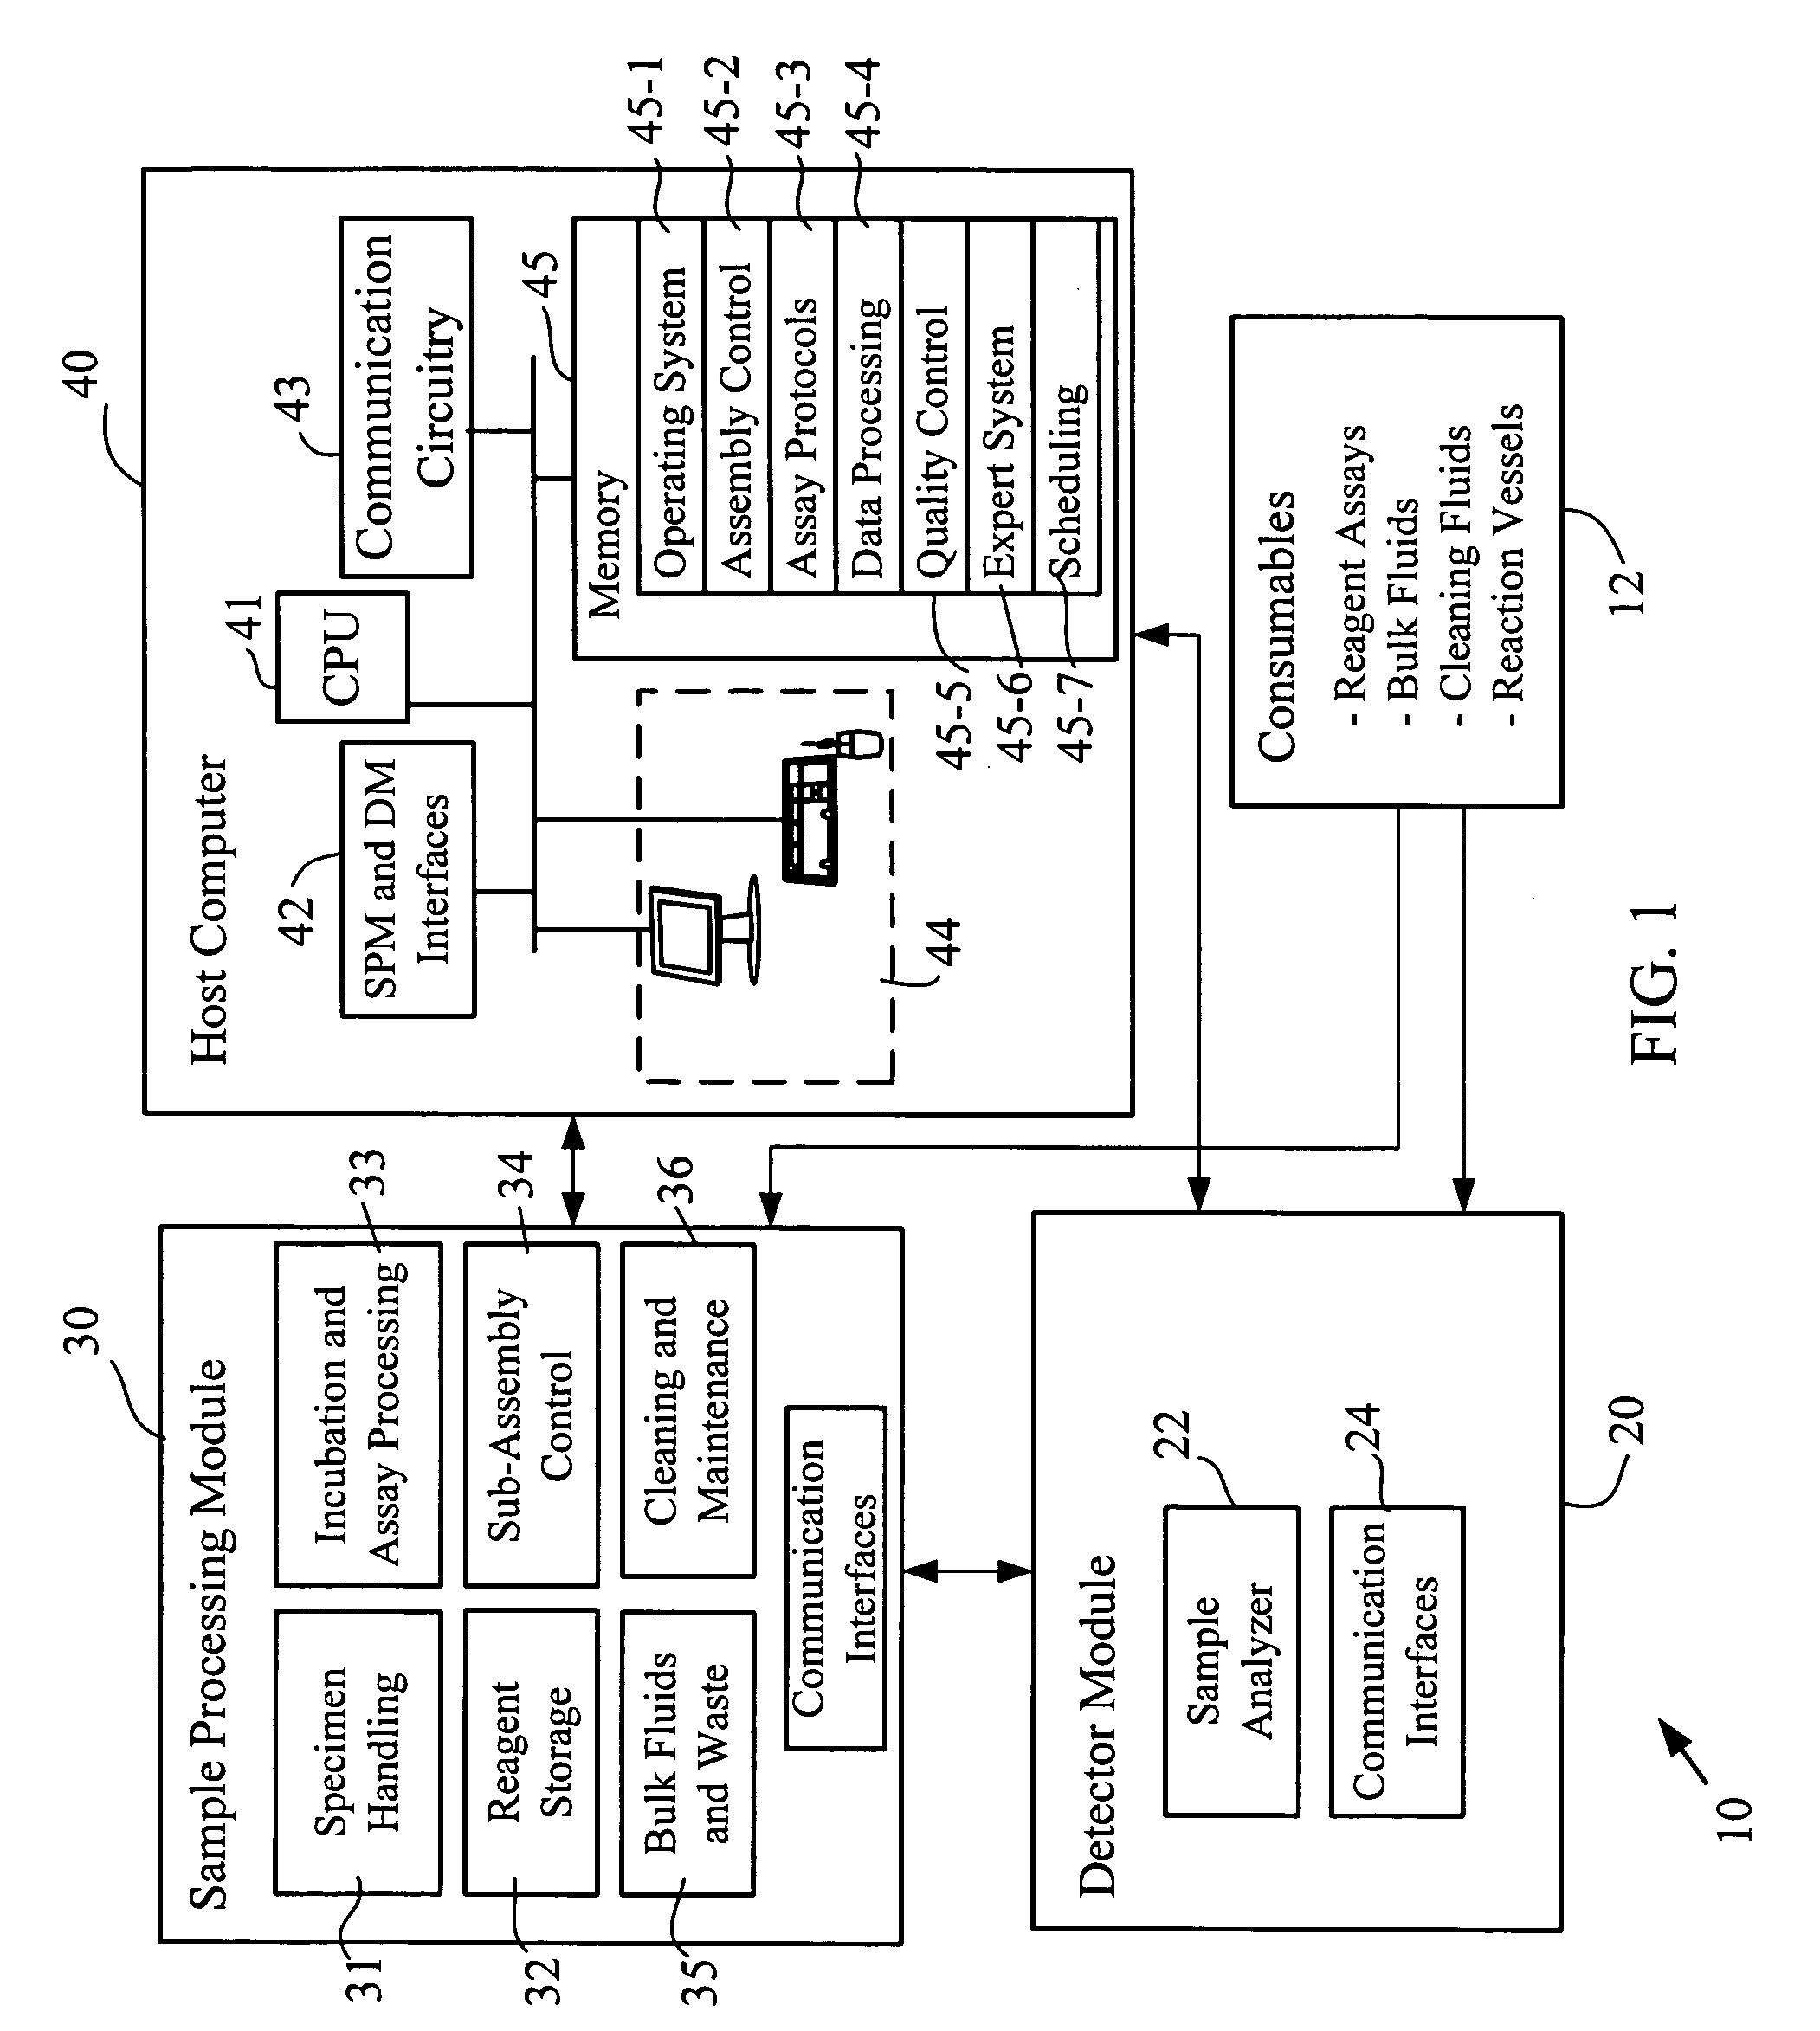 System and method for multi-analyte detection